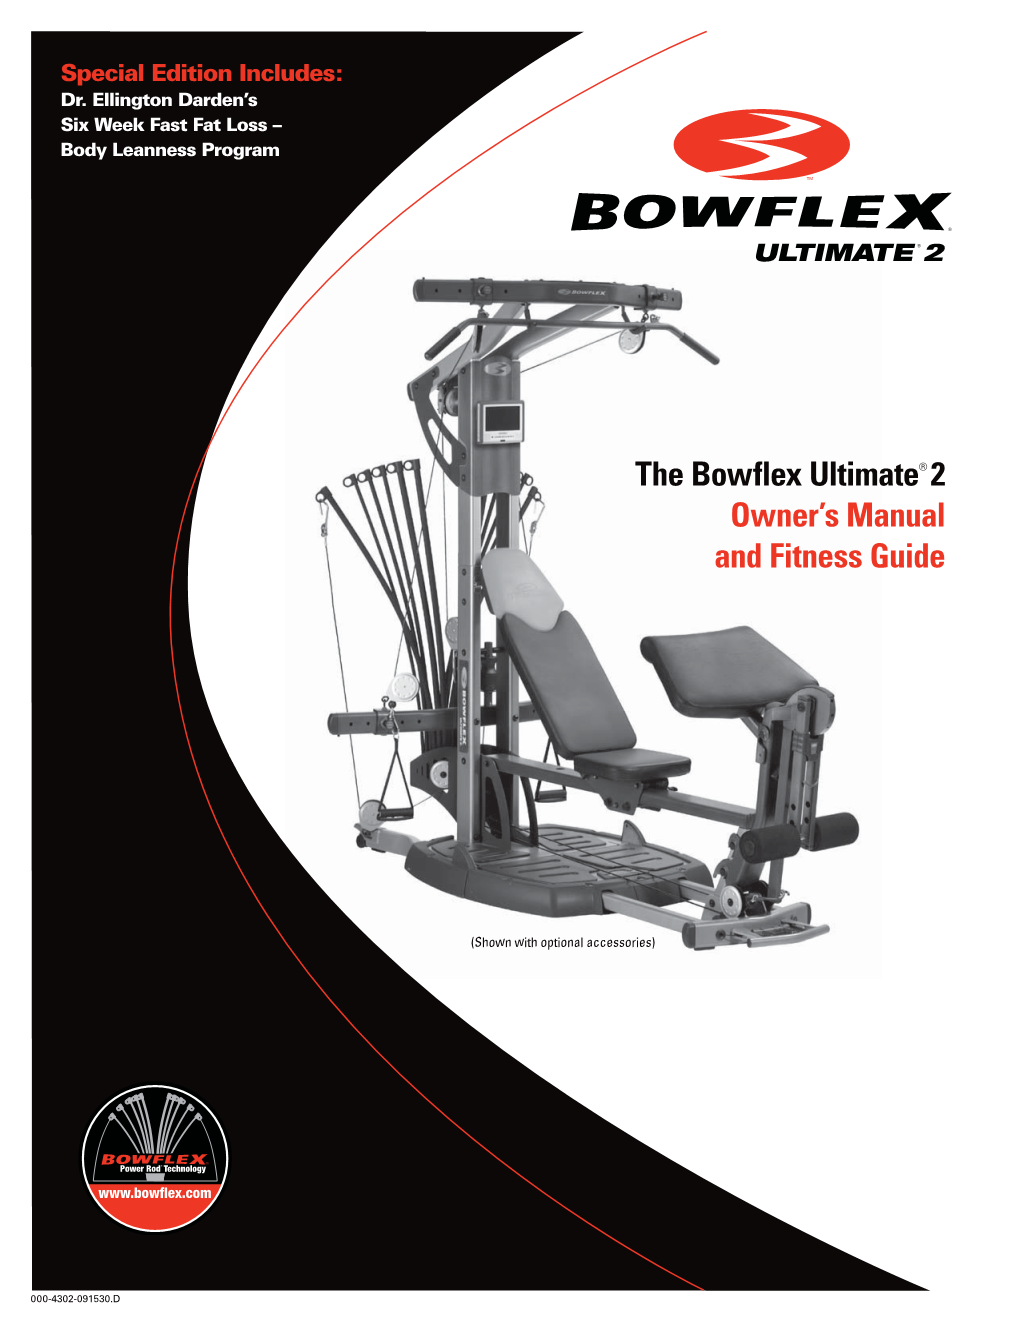 The Bowflex Ultimate 2 Owner’S Manual and Fitness Guide